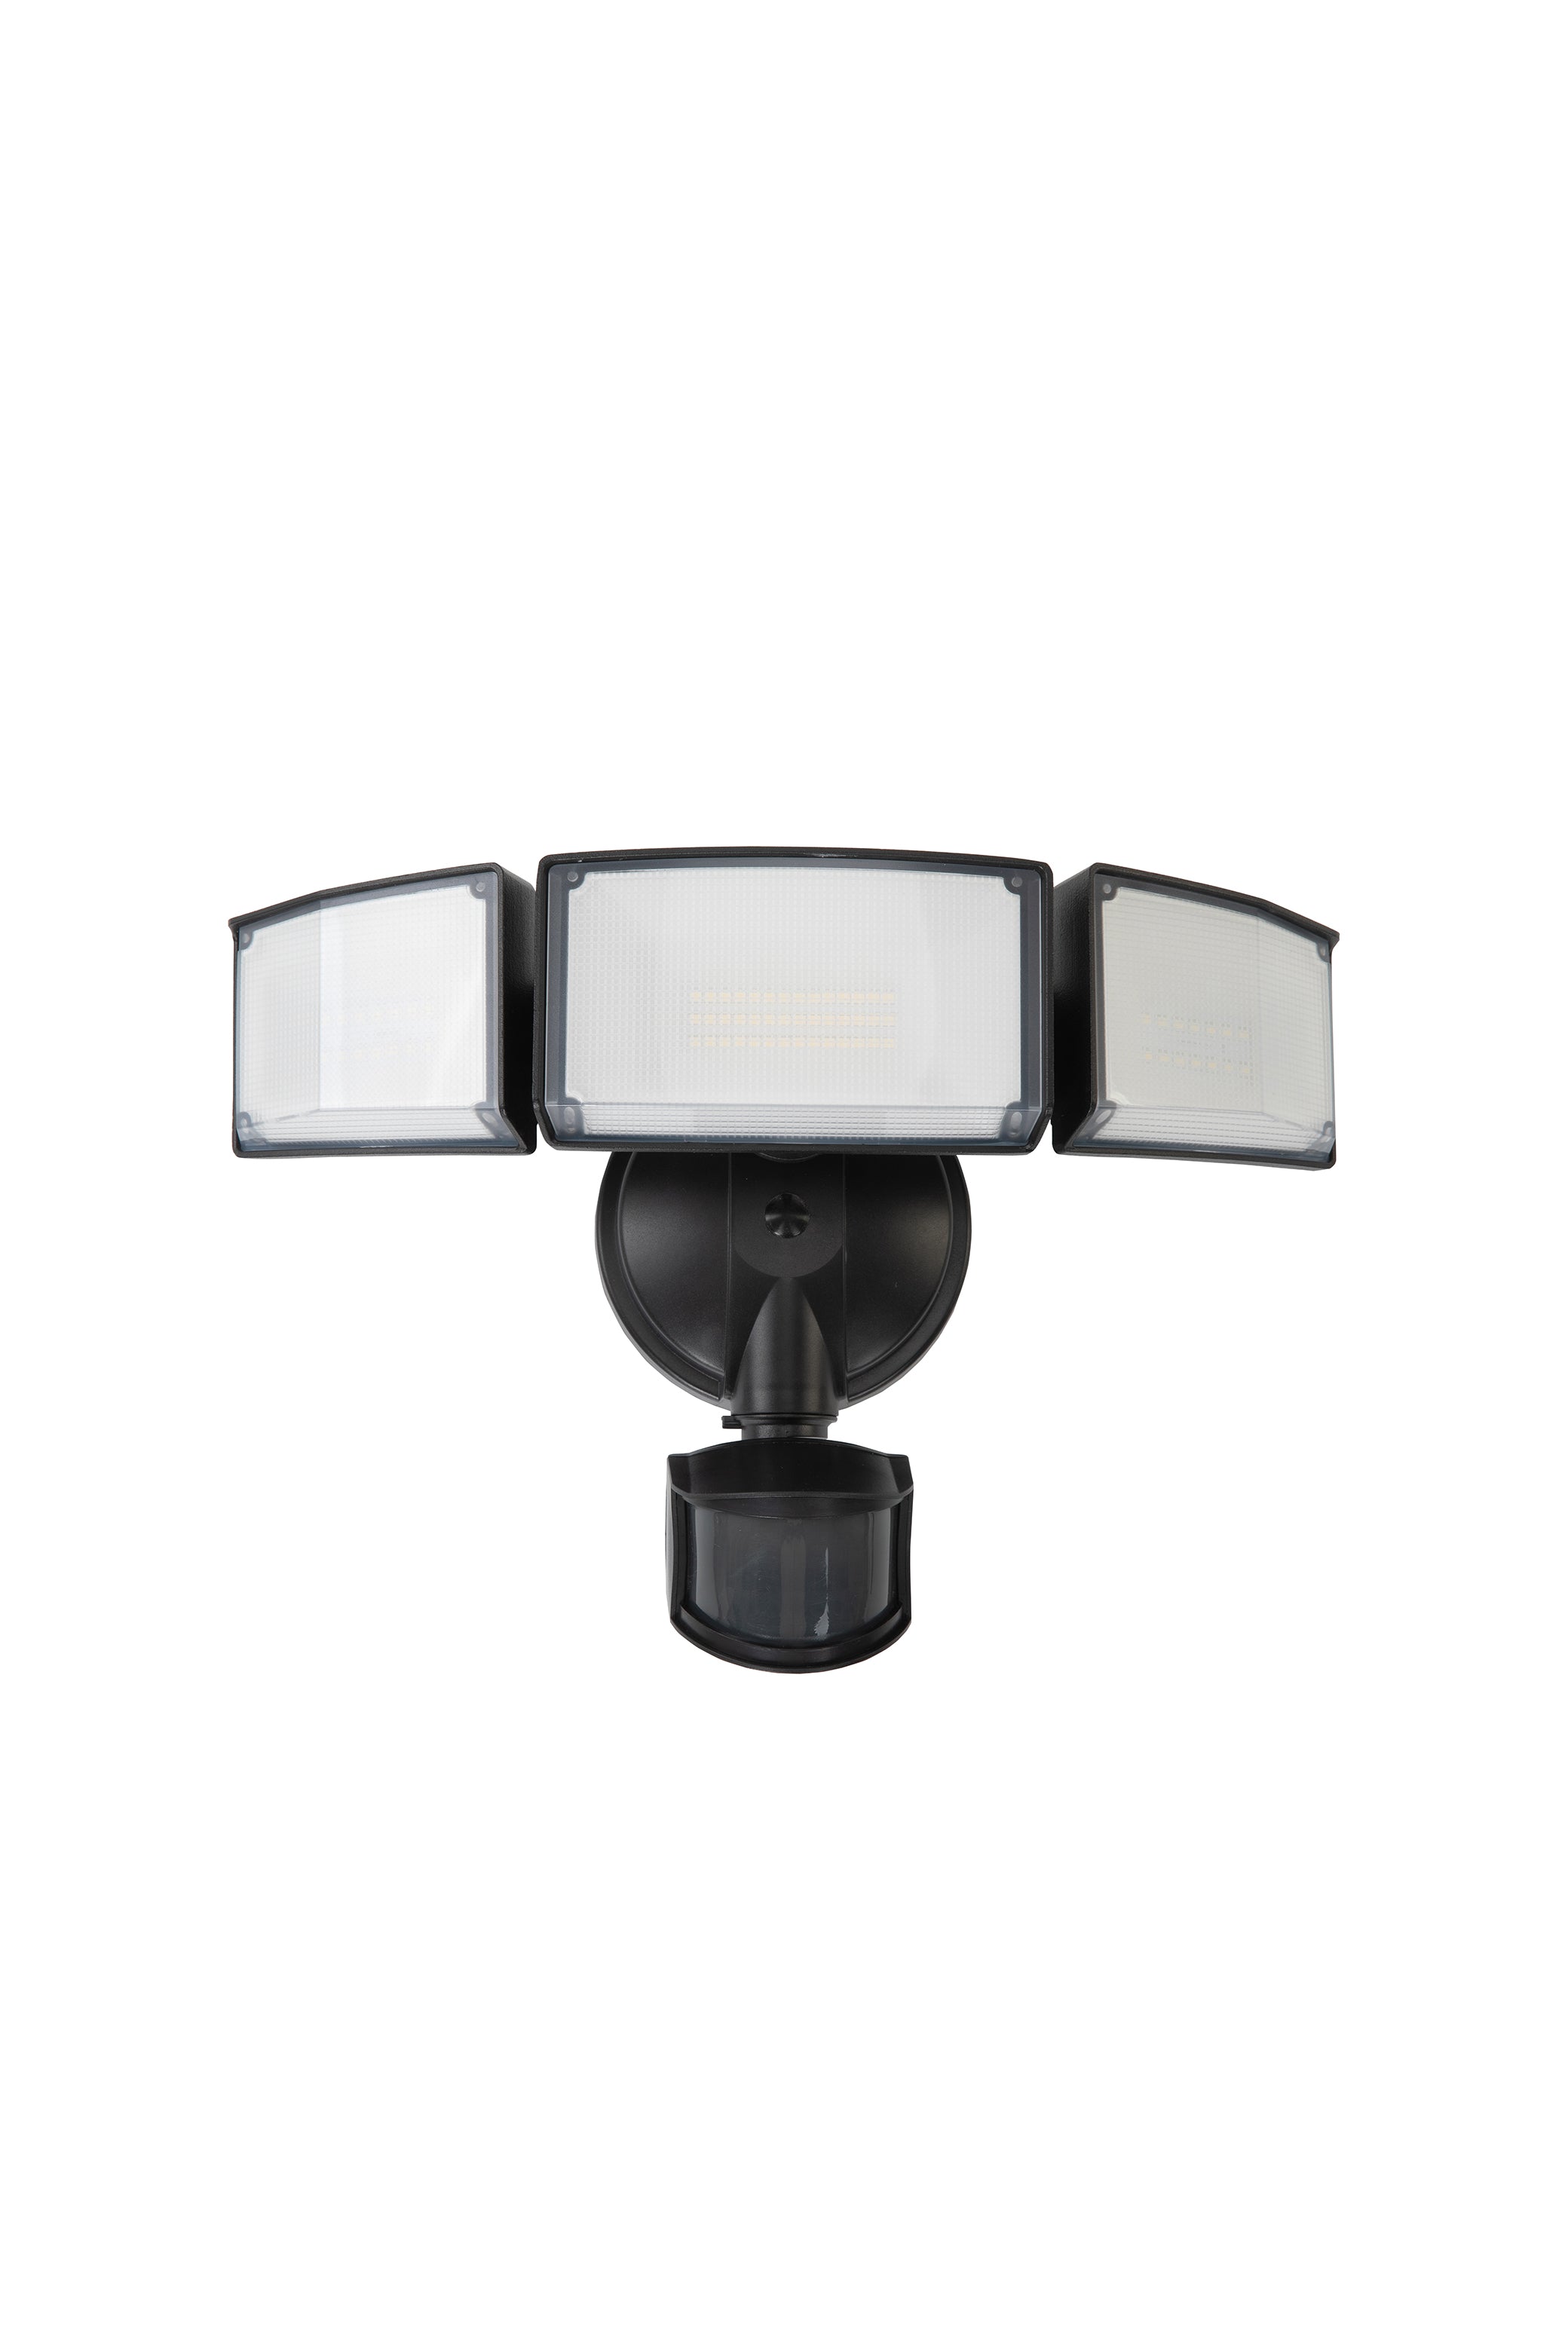 LUTEC-LED Security Lights with Motion Sensor, 6300LM, 5000K, 72W, with